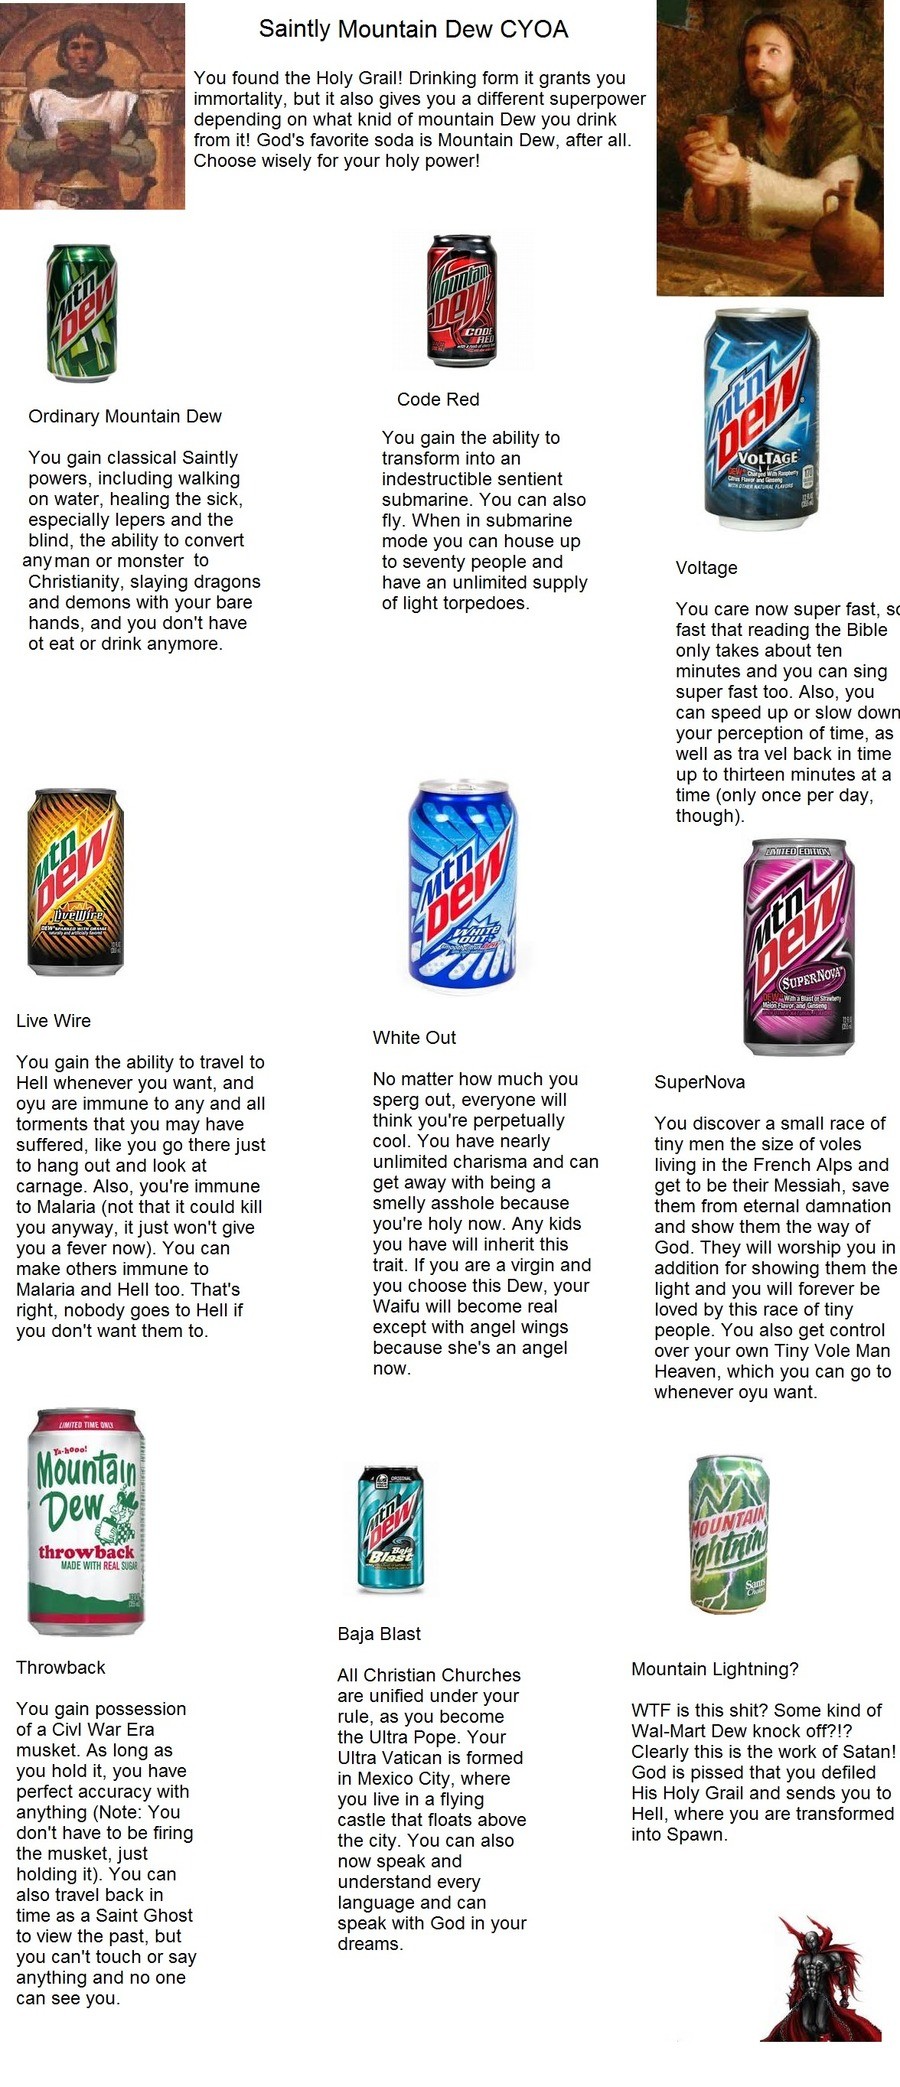 Mountain+dew+cyoa+yet+another+religion+related+picture+sorry+if_a99f78_5968870.jpg